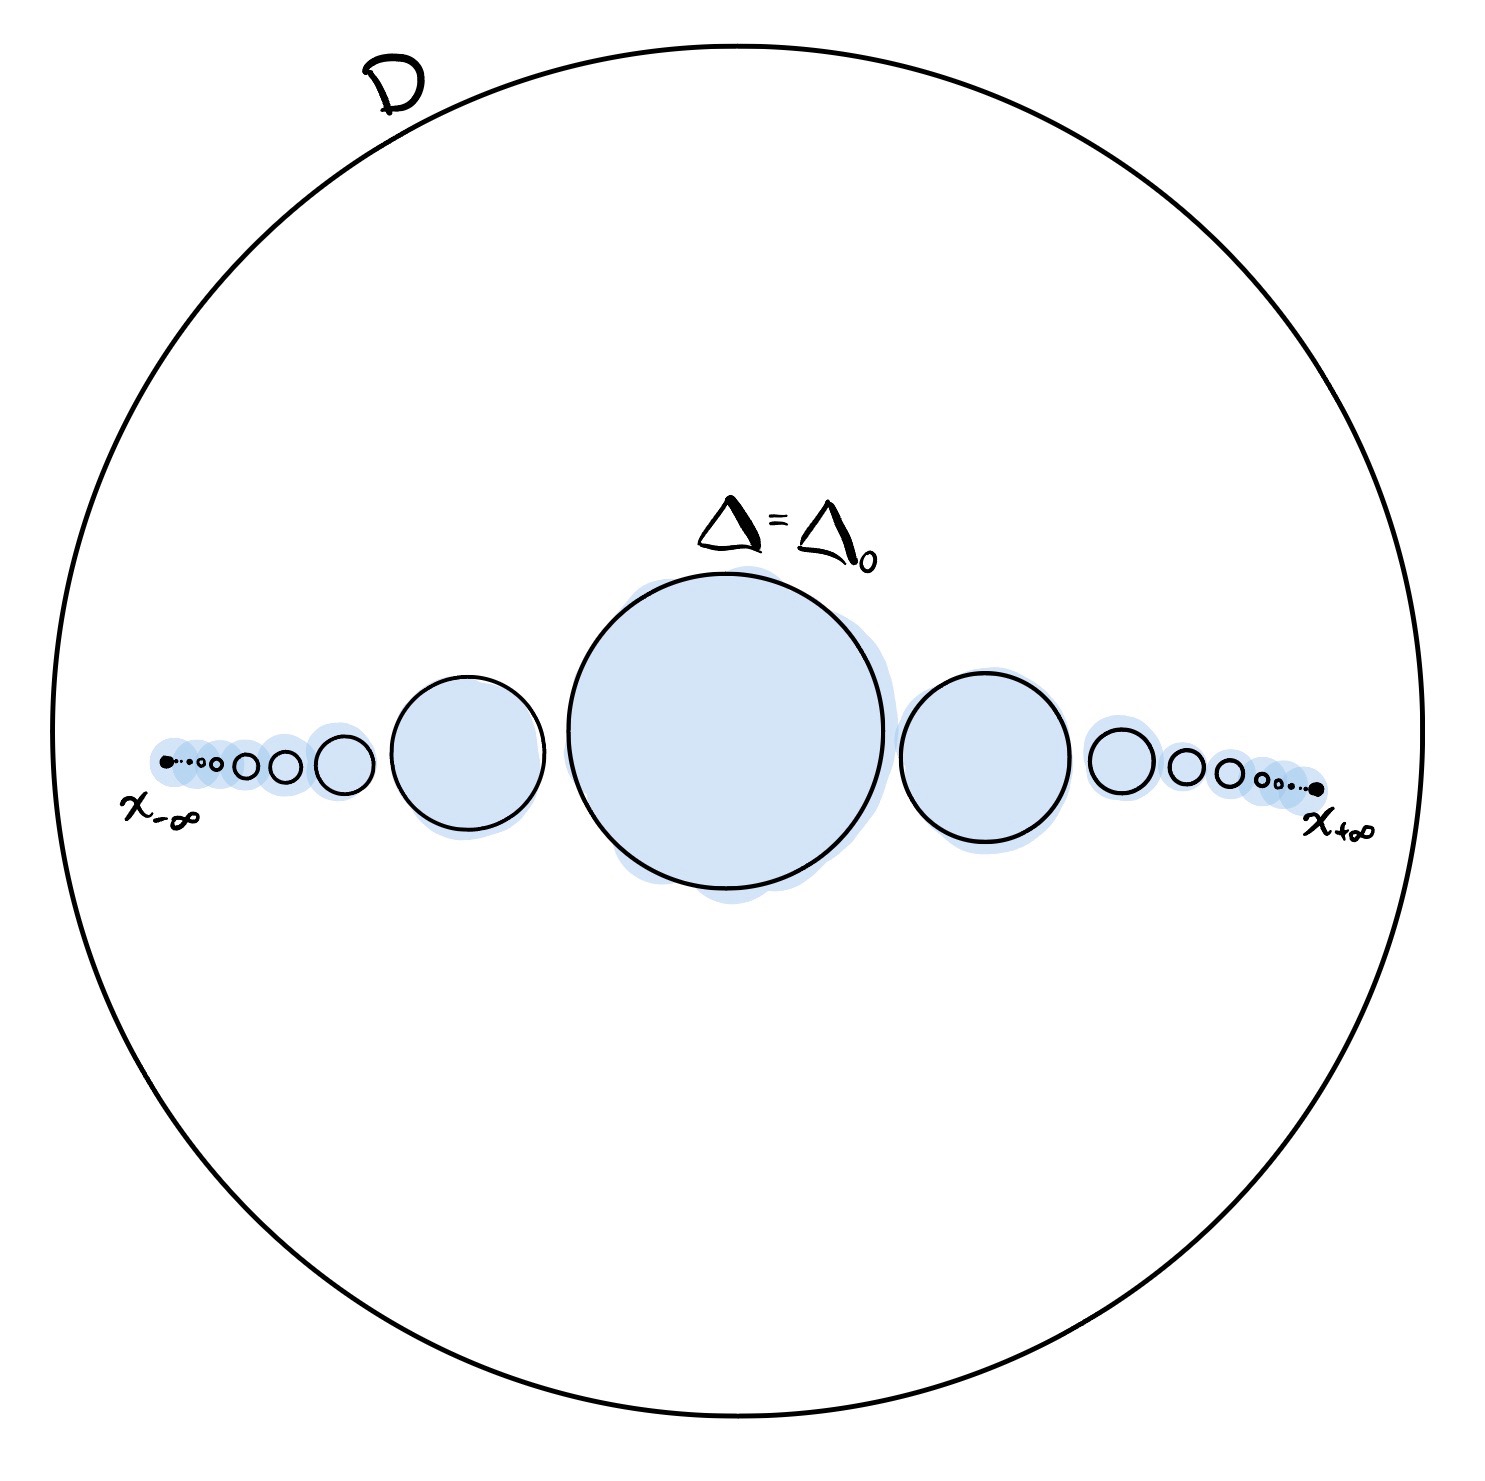 The countable disjoint union of disks and their two limit points